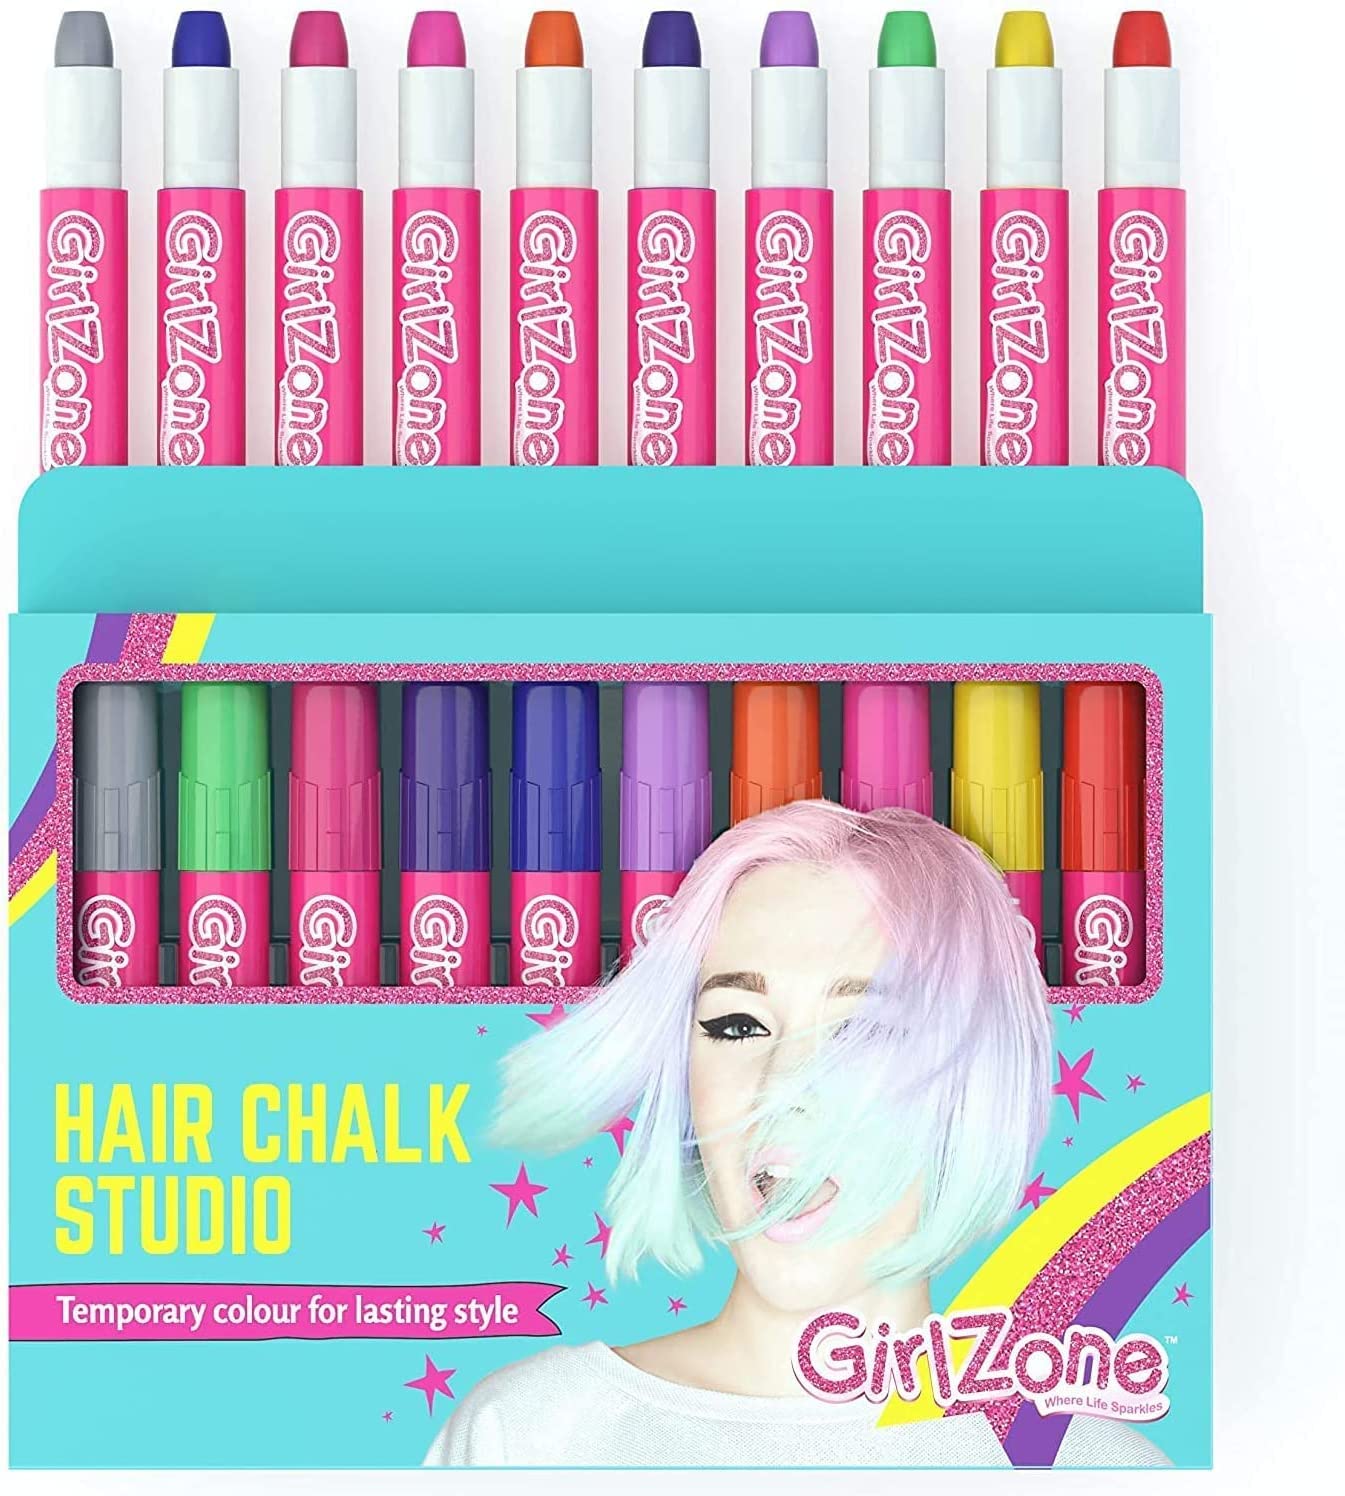 GirlZone Hair Chalks Set, 10-Piece Temporary Hair Chalks Color, Girl Toys For Girls Ages 8-12, Birthday Gifts For Girls & Girls Toys 8-10 Years Old